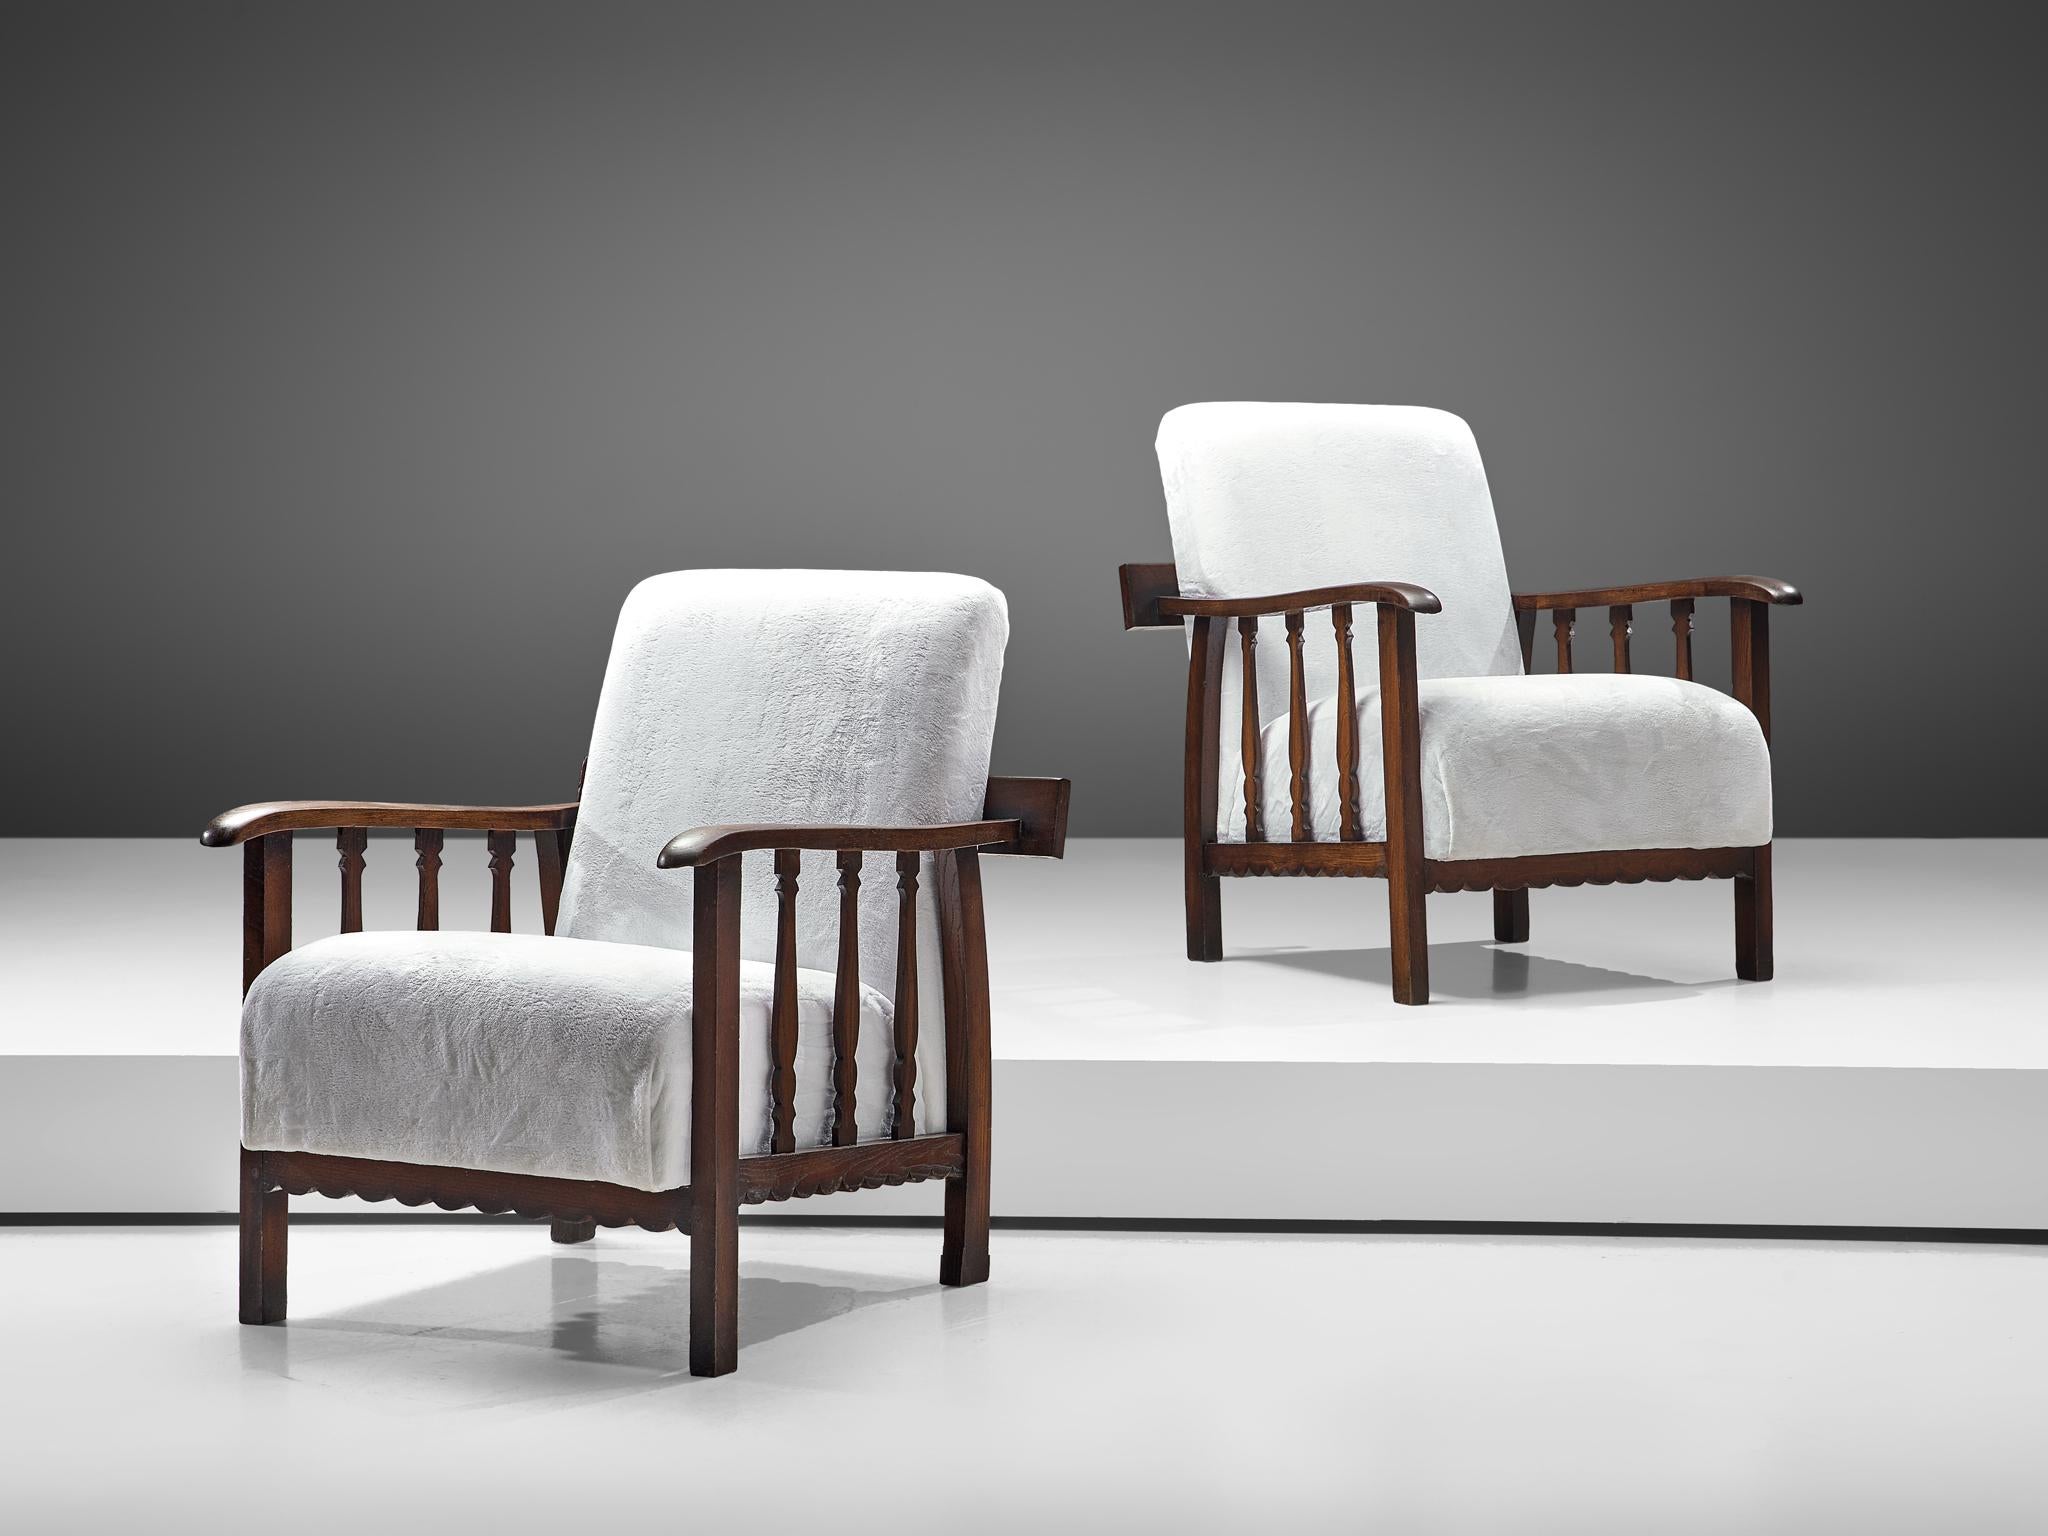 Pier Luigi Colli for Martinotti, pair of lounge chairs, darkened oak and fabric, Italy, 1940s

This beautiful set of armchairs is designed by the Italian designer Pier Luigi Colli and produced by his own company Martinotti, that was specialized in